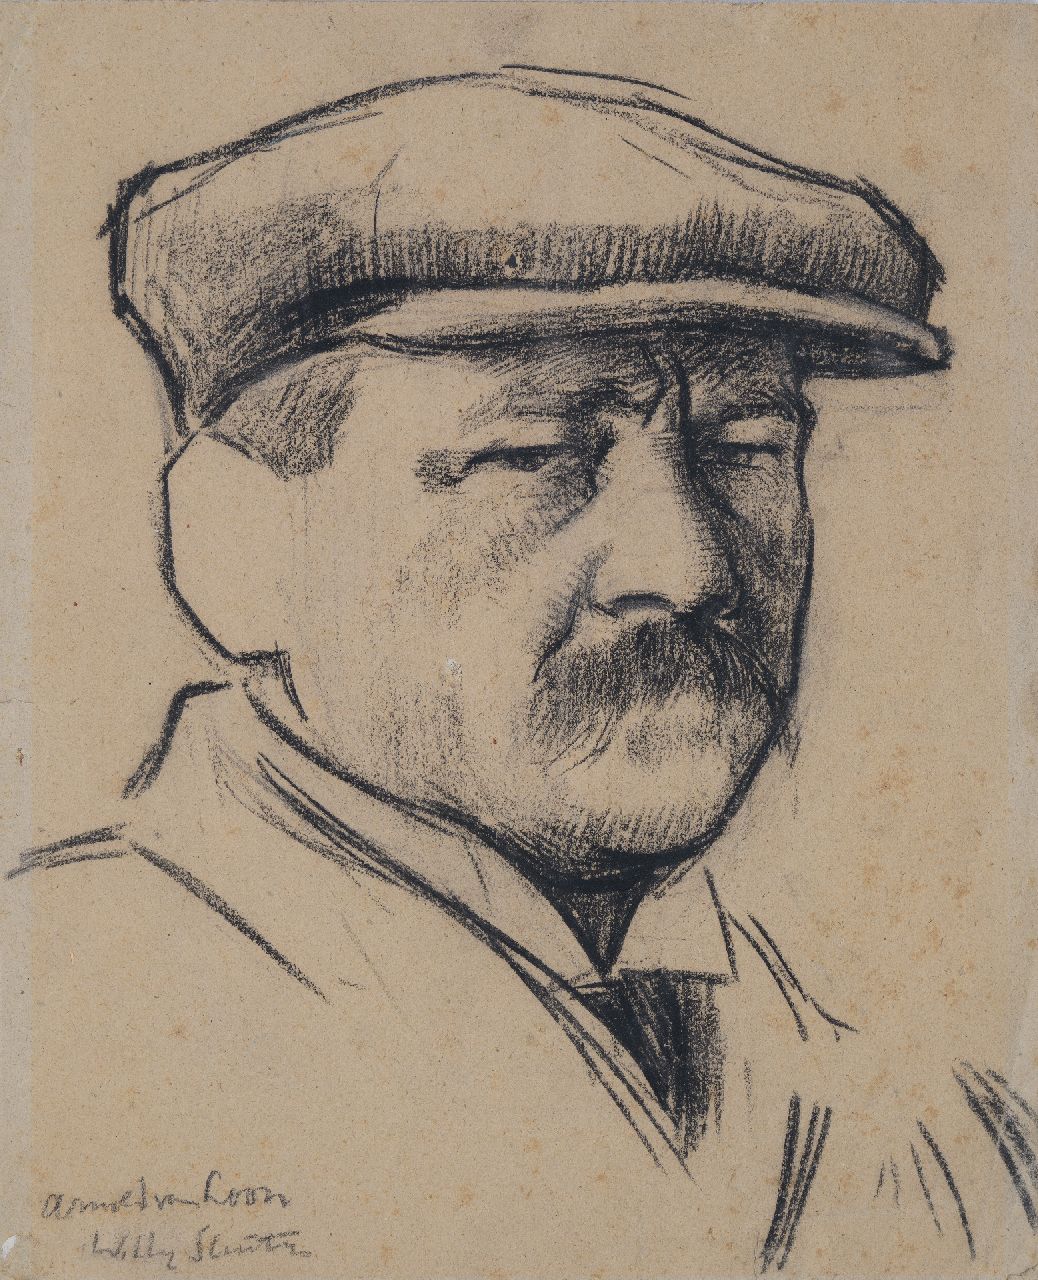 Sluiter J.W.  | Jan Willem 'Willy' Sluiter | Watercolours and drawings offered for sale | Portrait of Arnout van Loon, chalk on paper 38.6 x 31.6 cm, signed l.l.